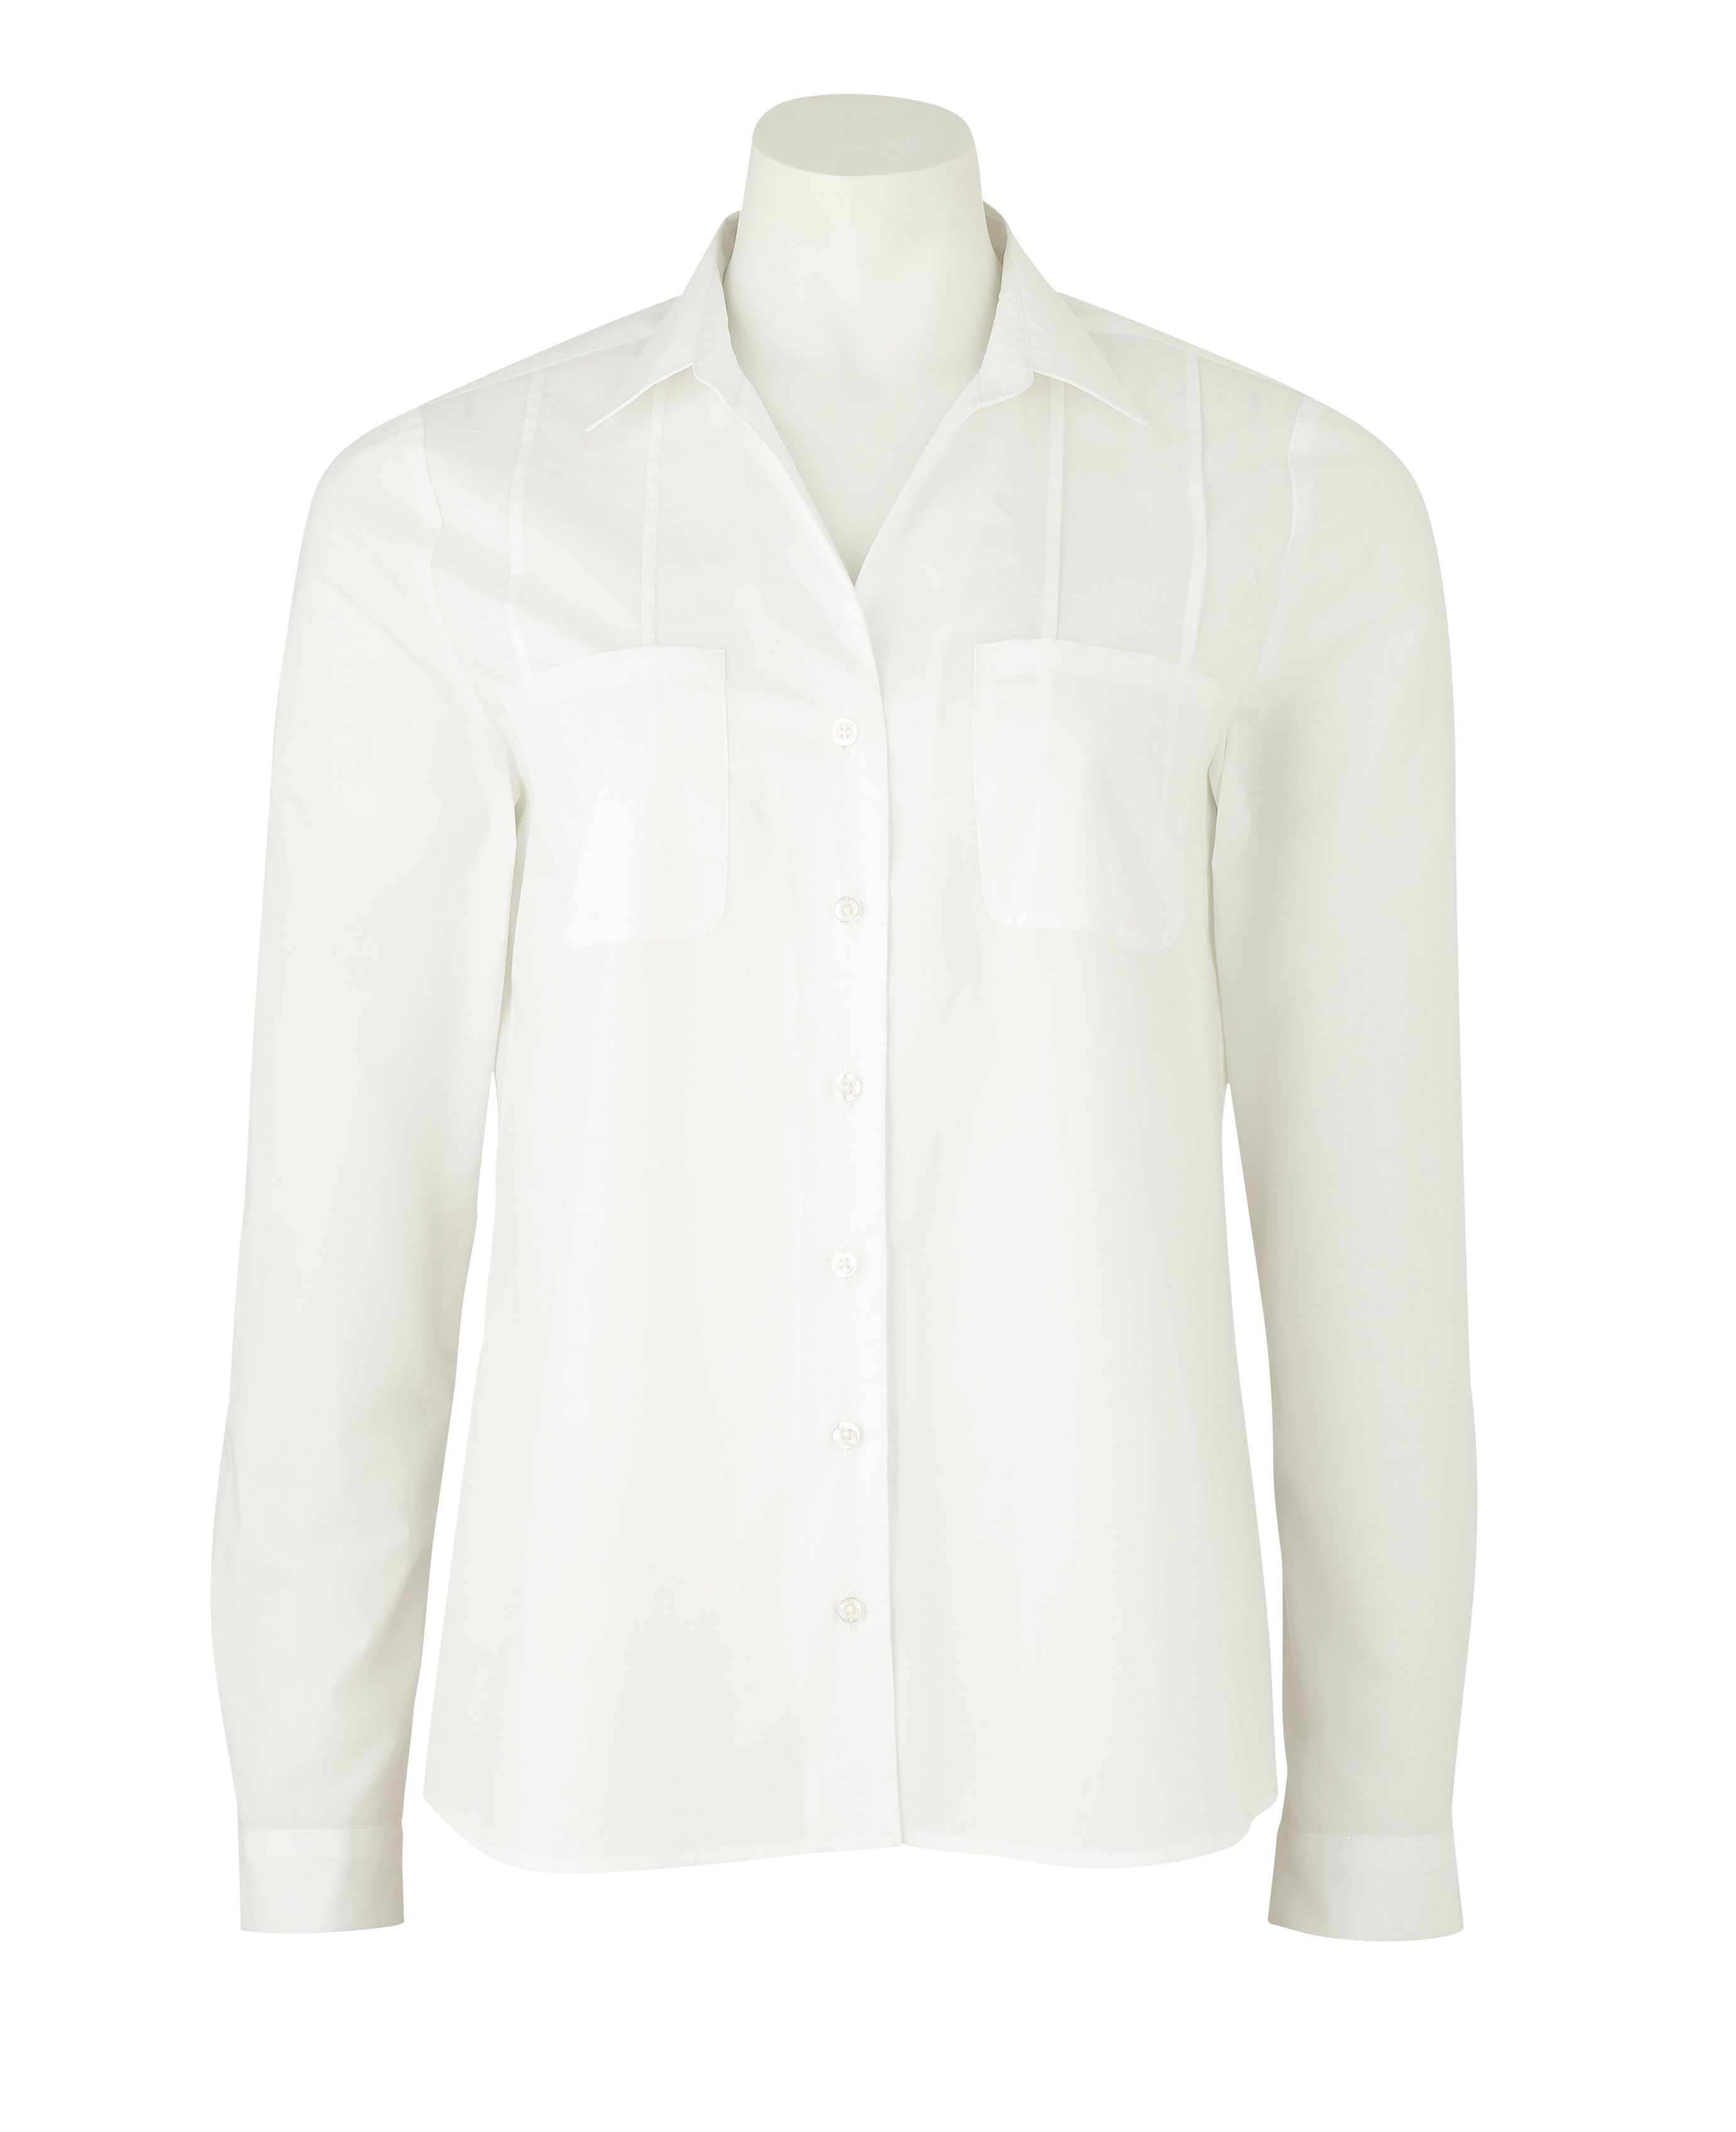 Women's White Semi-Fitted Shirt With Pin-Tuck Detailing | Savile Row Co